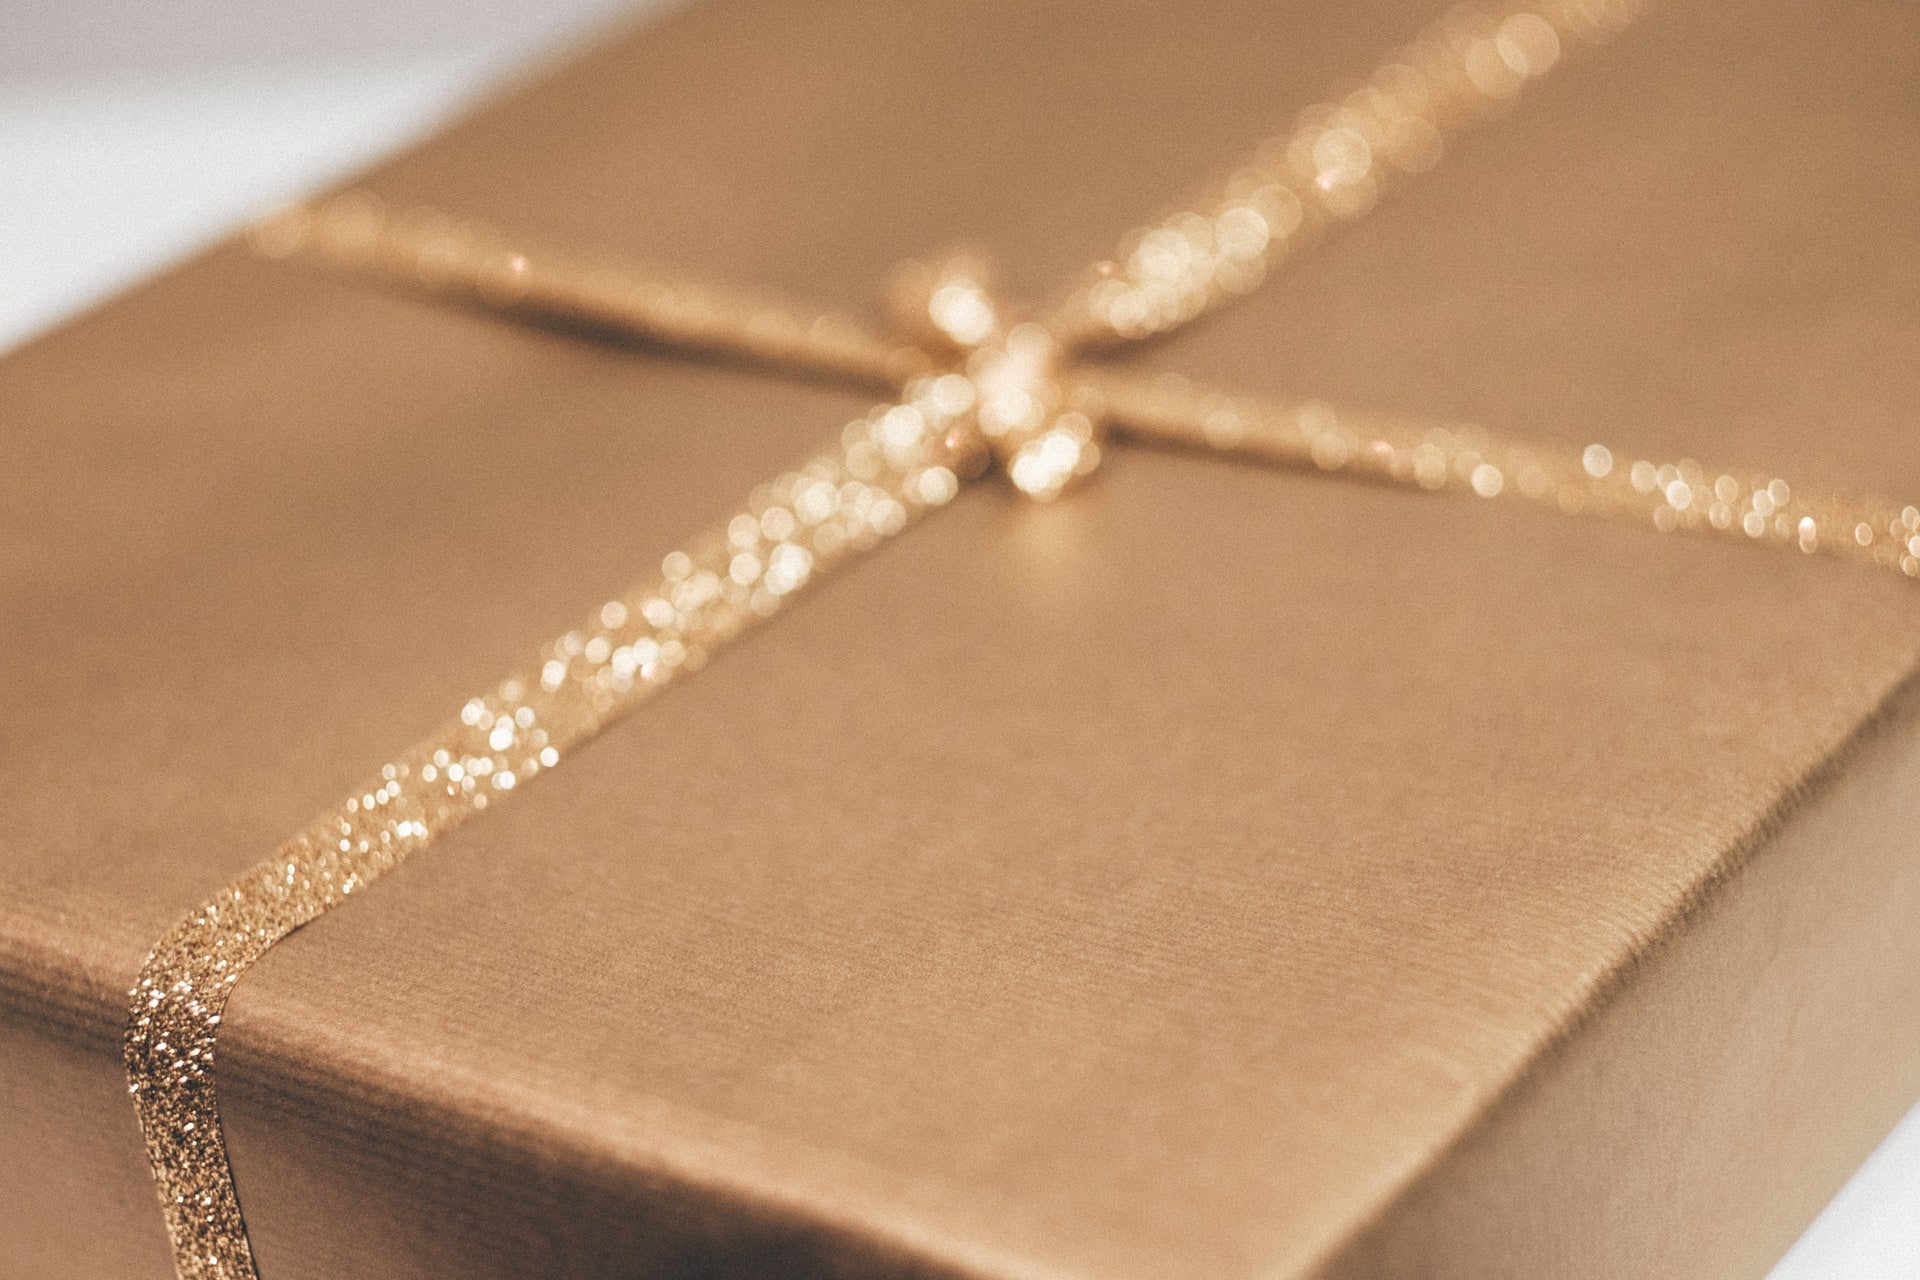 How To Choose A Jewelry Gift For Her